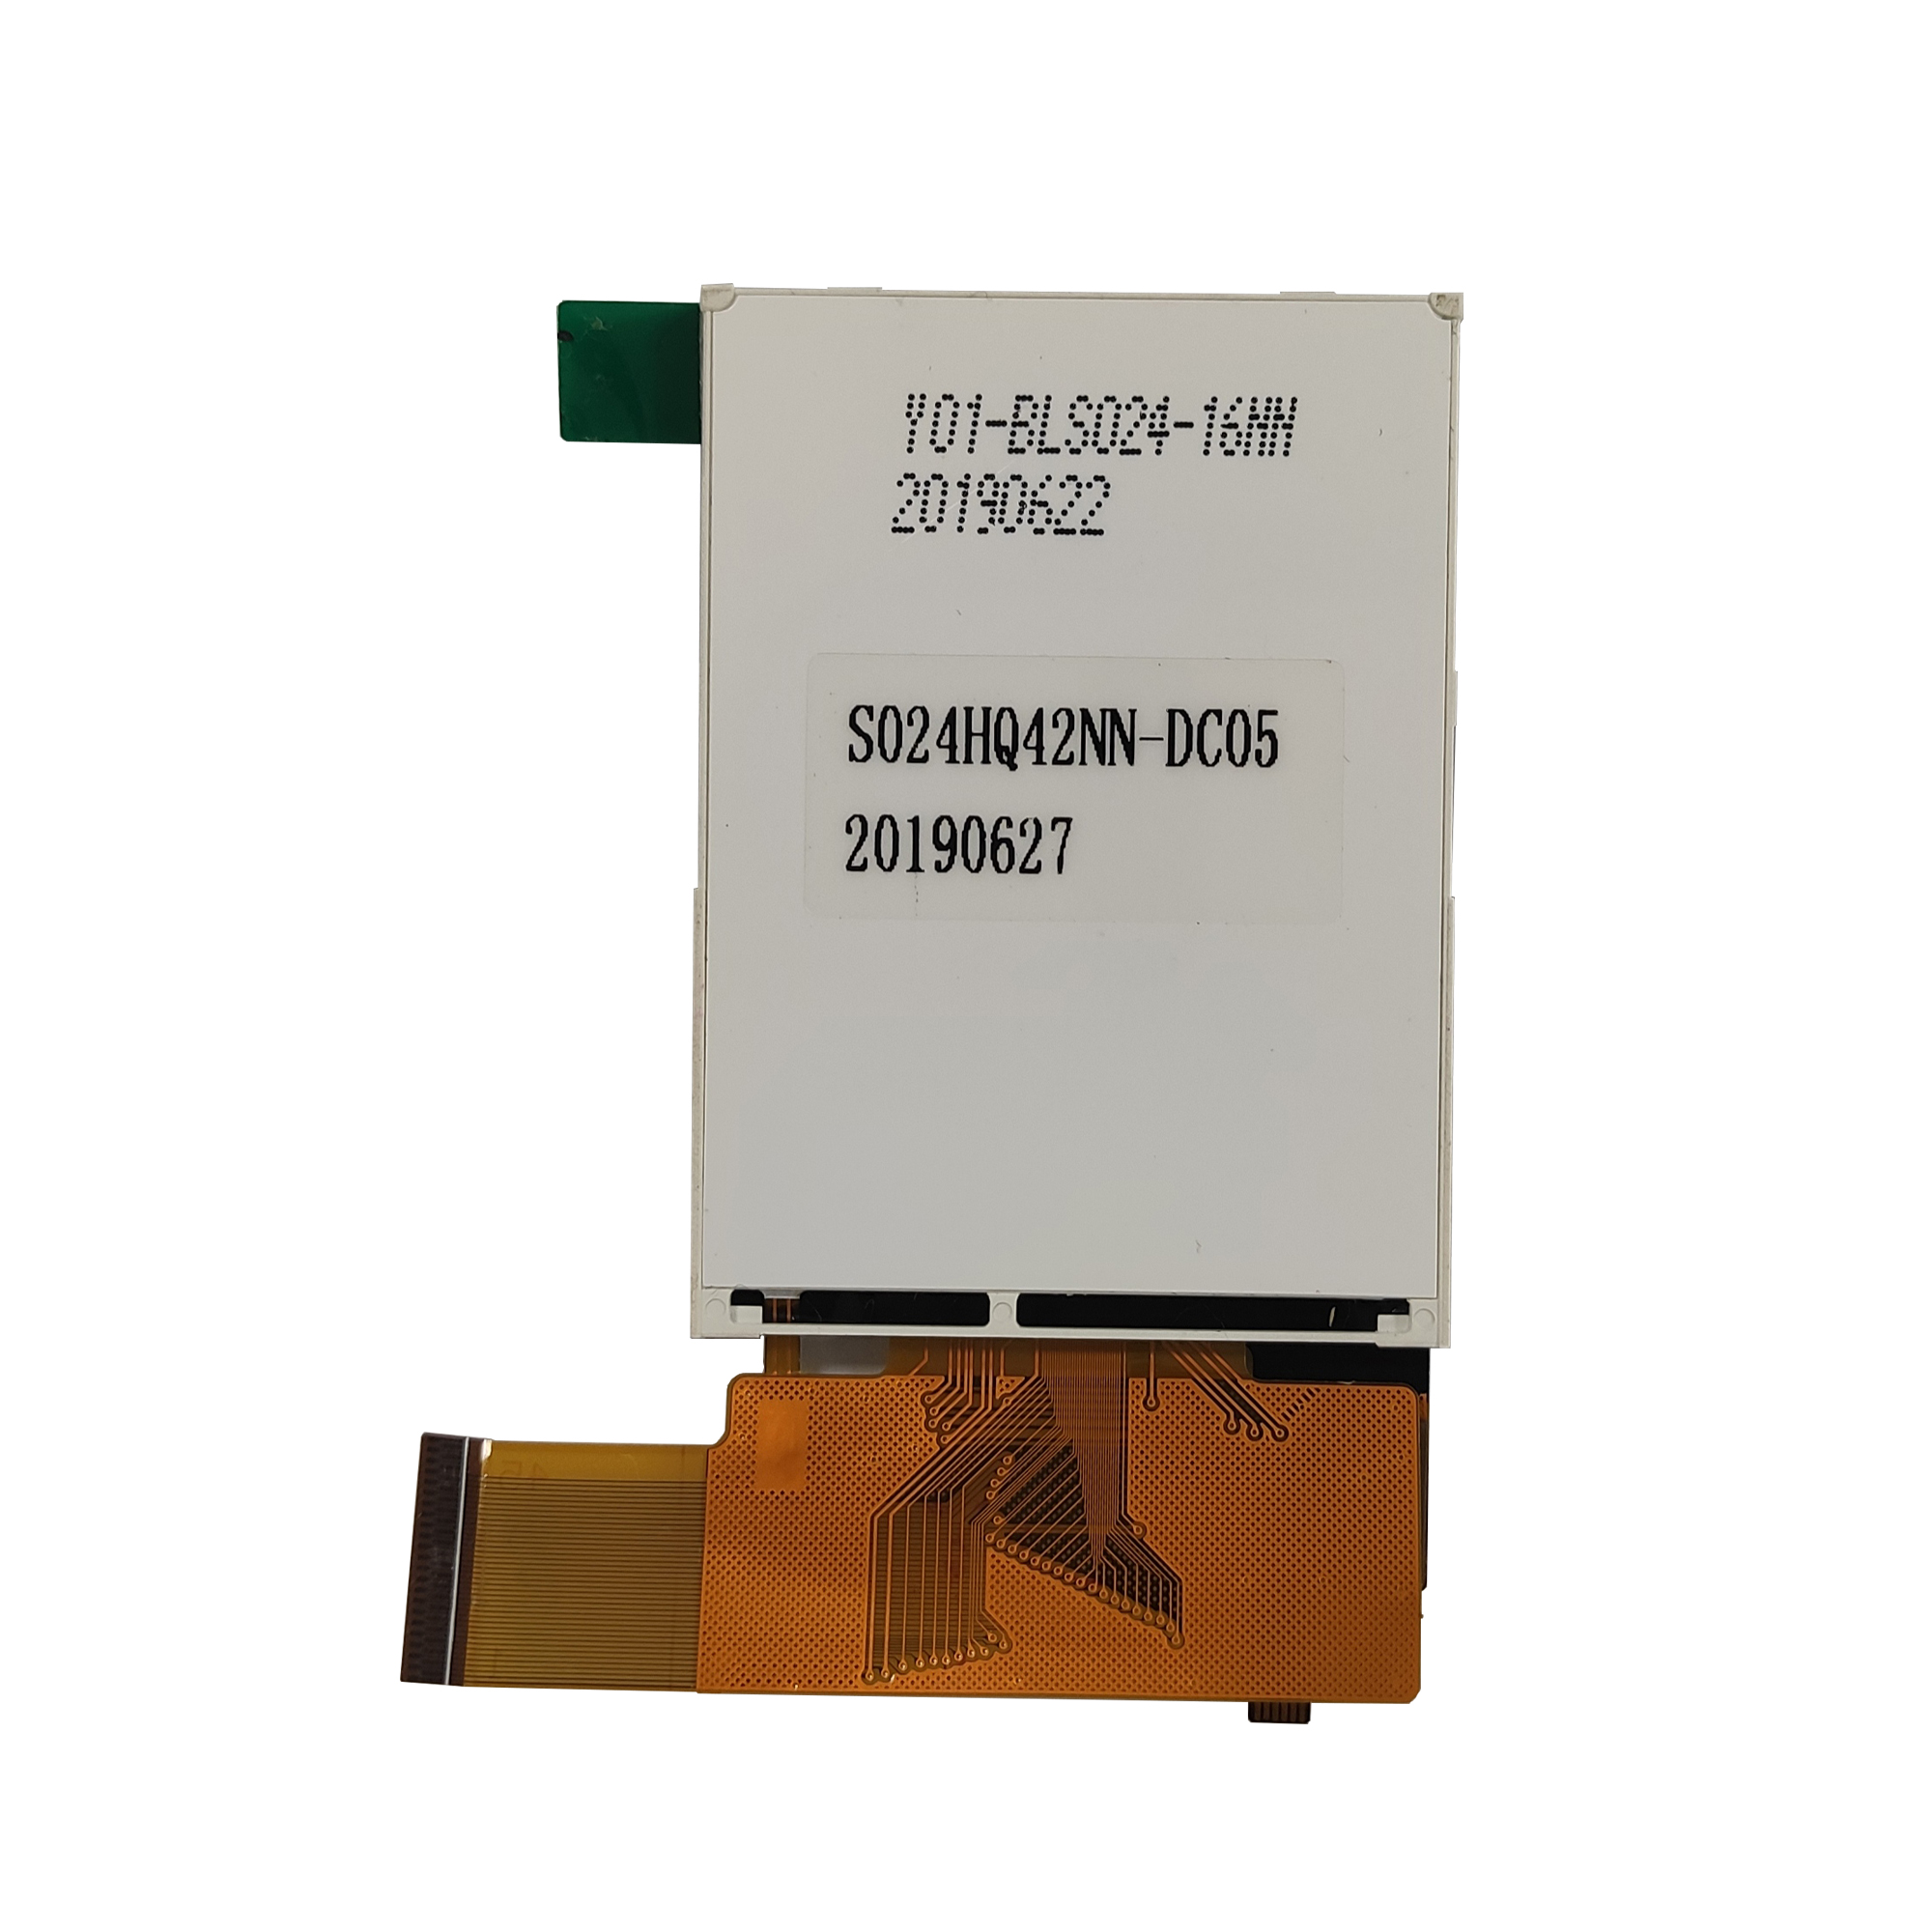 2.4 inch 240*320 TFT LCD display with RGB/MCU/SPI interface